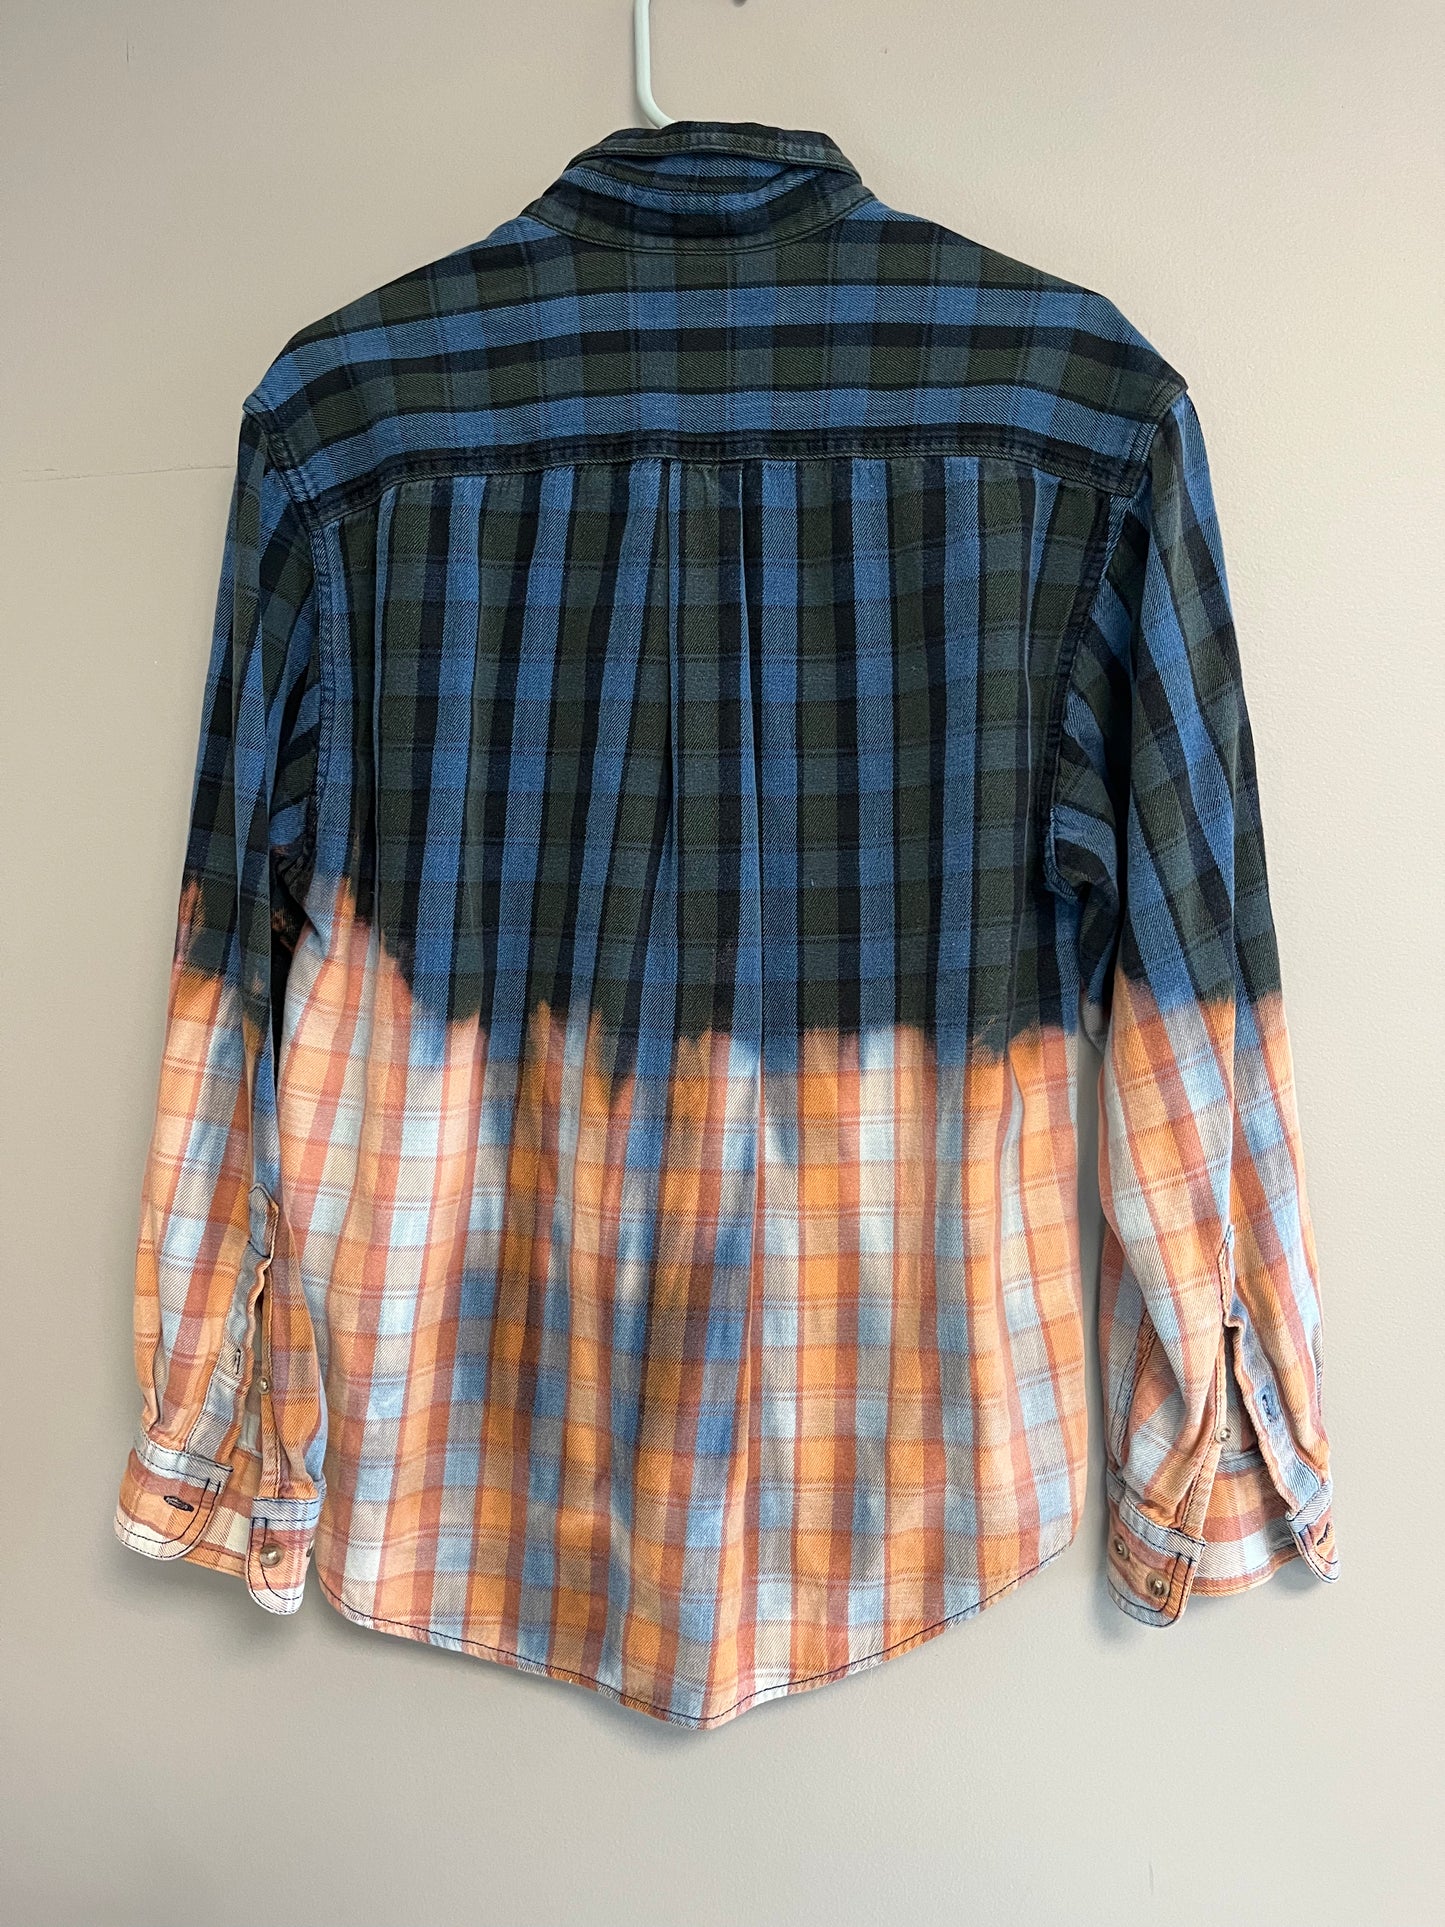 Dip Dye Flannel w/ Hand Hammered Grommets